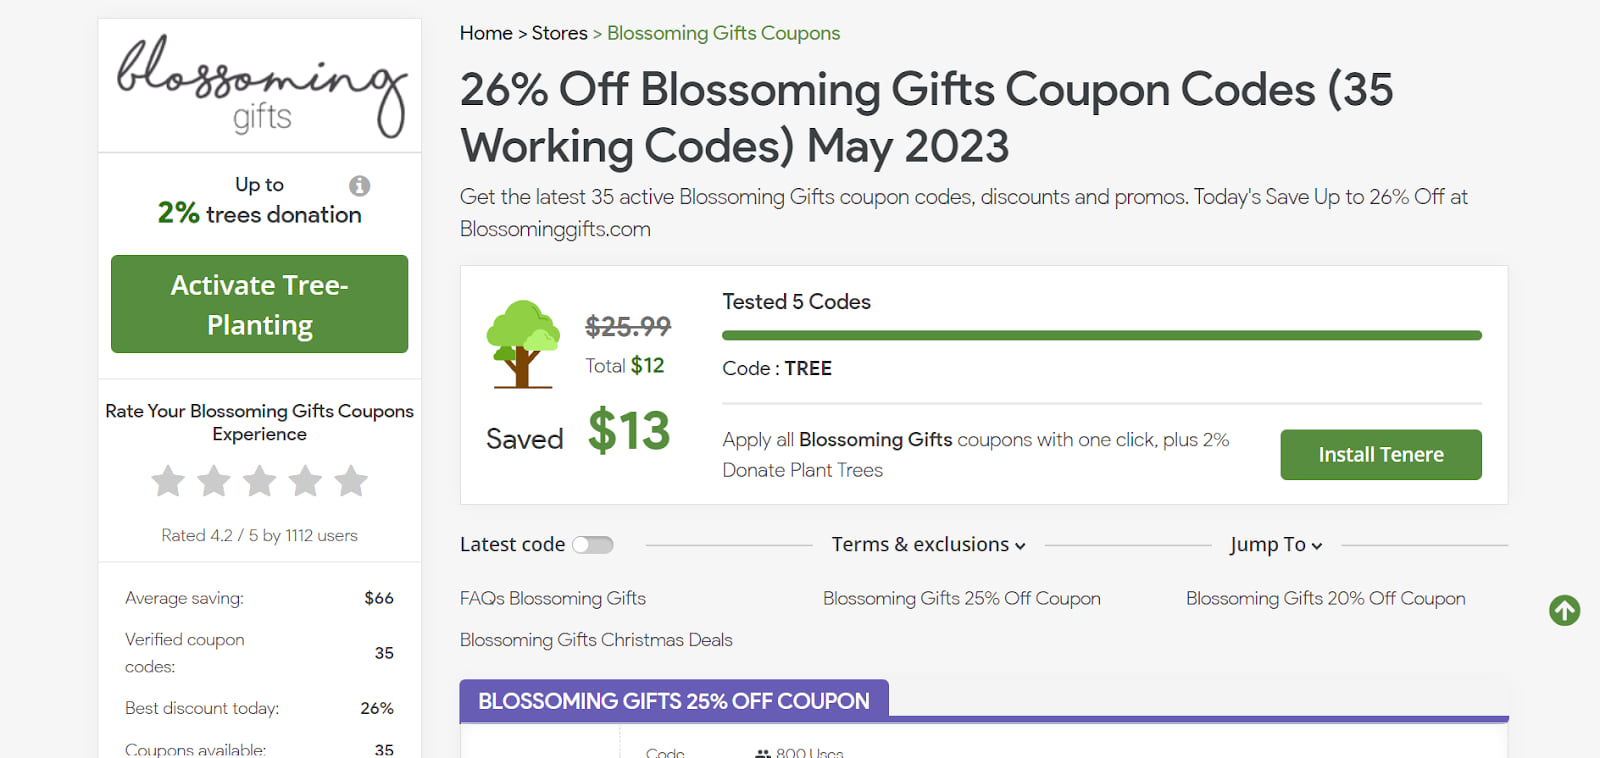 How To Use Blossoming Gifts Discount Code 4